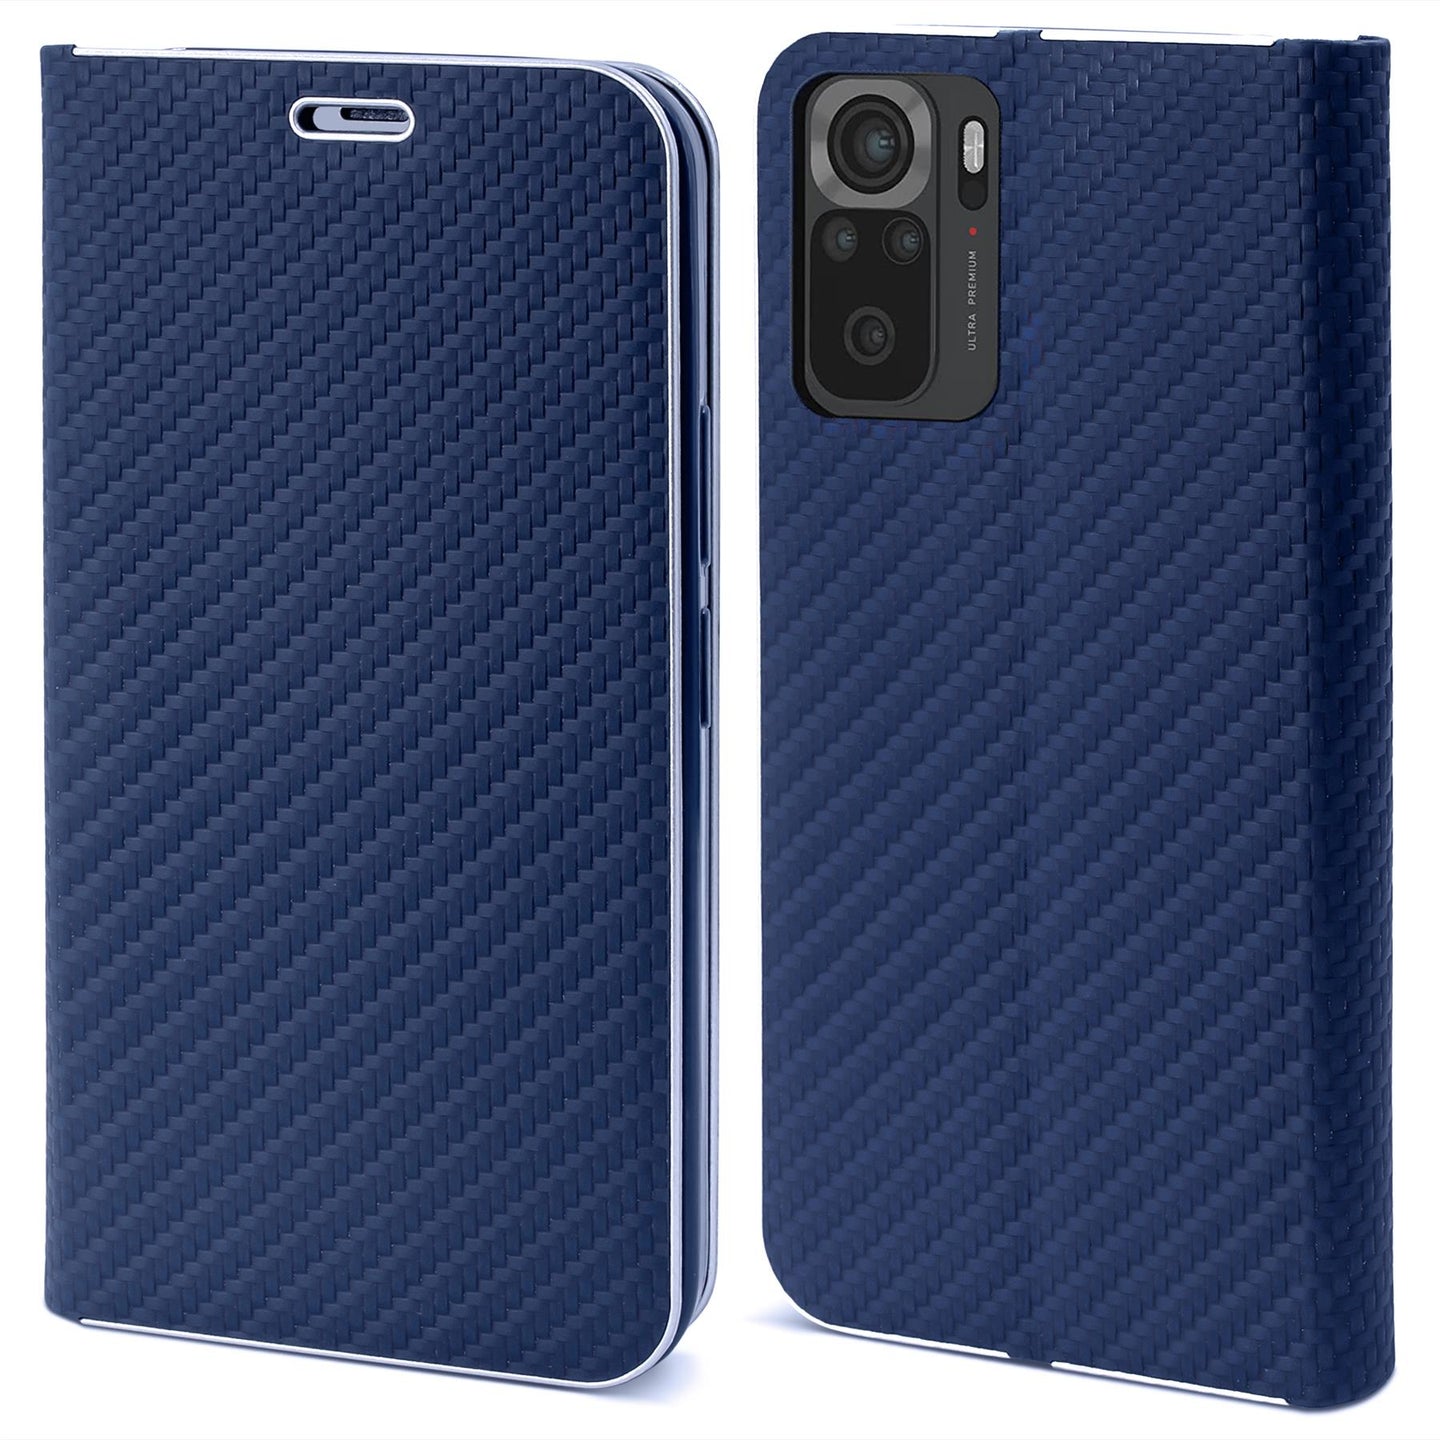 Moozy Wallet Case for Xiaomi Redmi Note 10 / Note 10S, Dark Blue Carbon - Flip Case with Metallic Border Design Magnetic Closure Flip Cover with Card Holder and Kickstand Function